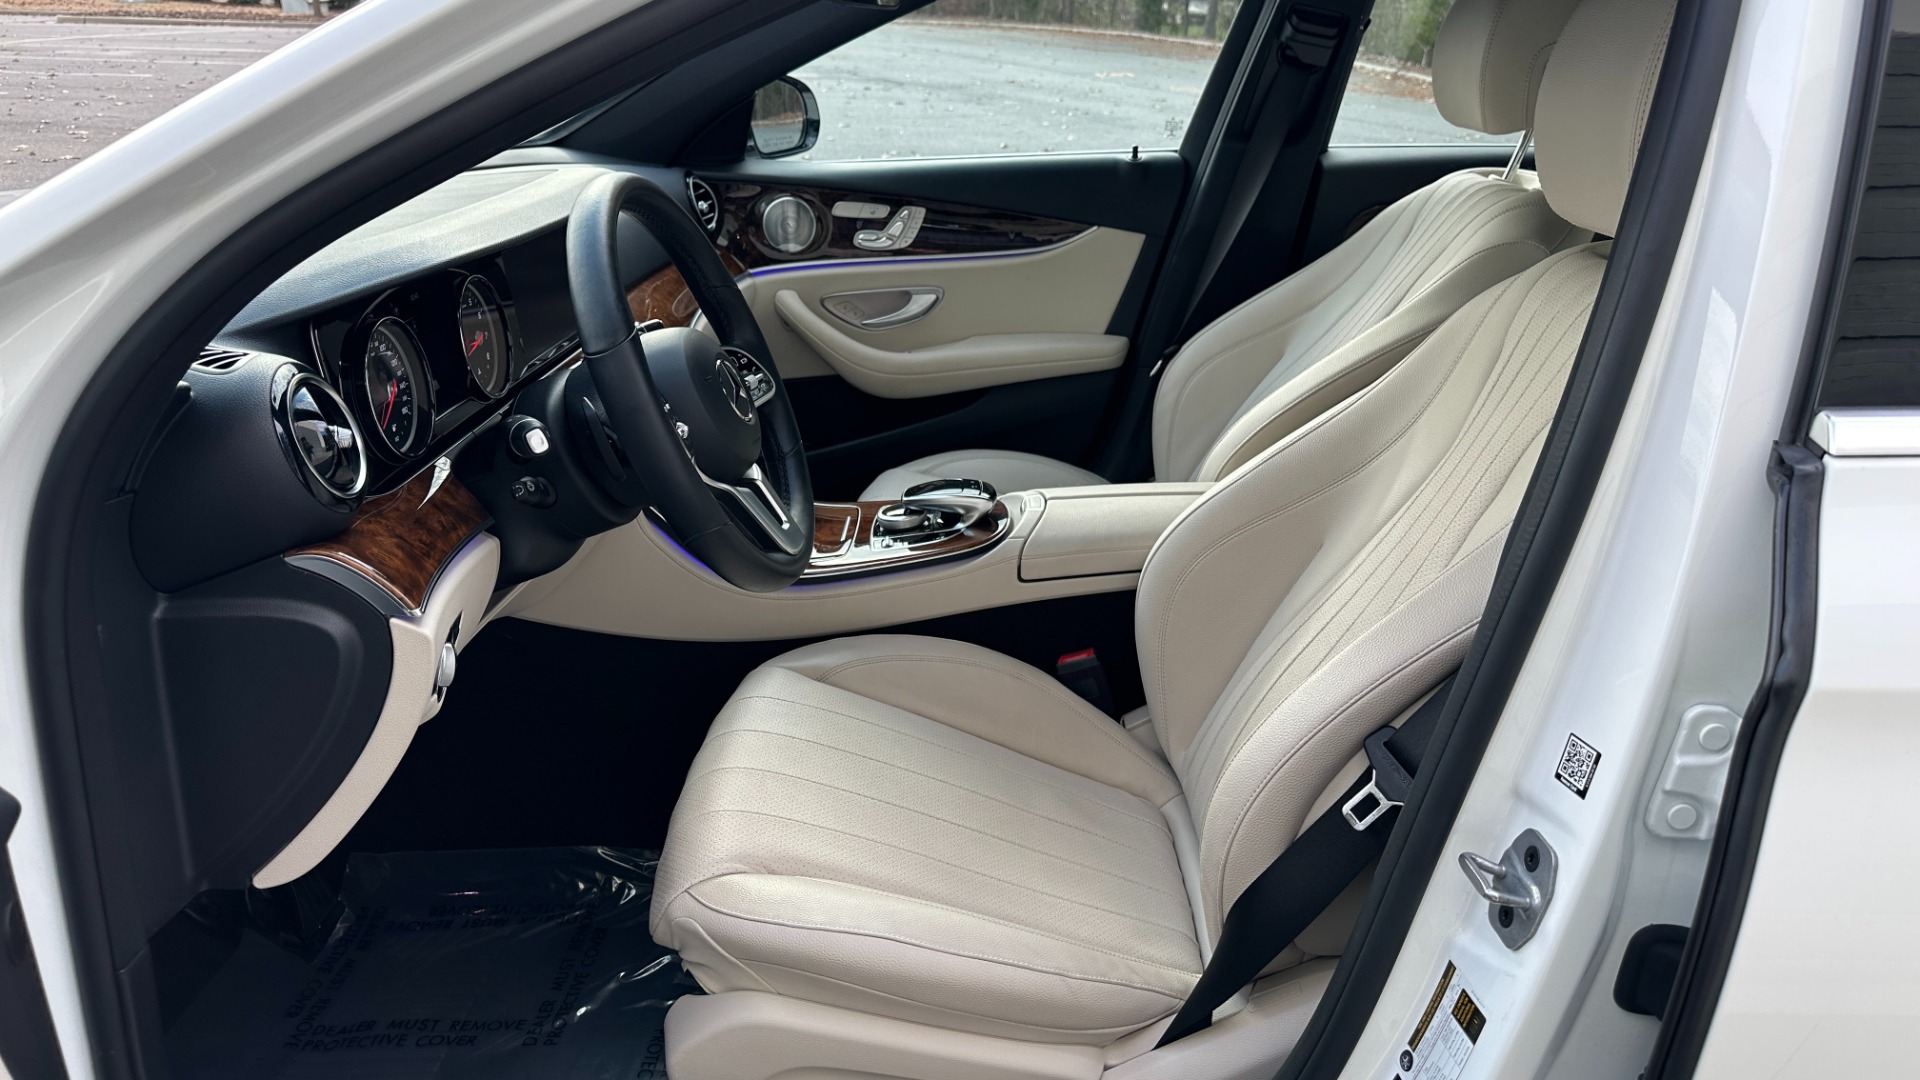 Used 2019 Mercedes-Benz E-Class E300 / PREMIUM PACKAGE / BLIND SPOT / BURMESTER SOUND / HEATED STEERING for sale $41,495 at Formula Imports in Charlotte NC 28227 11